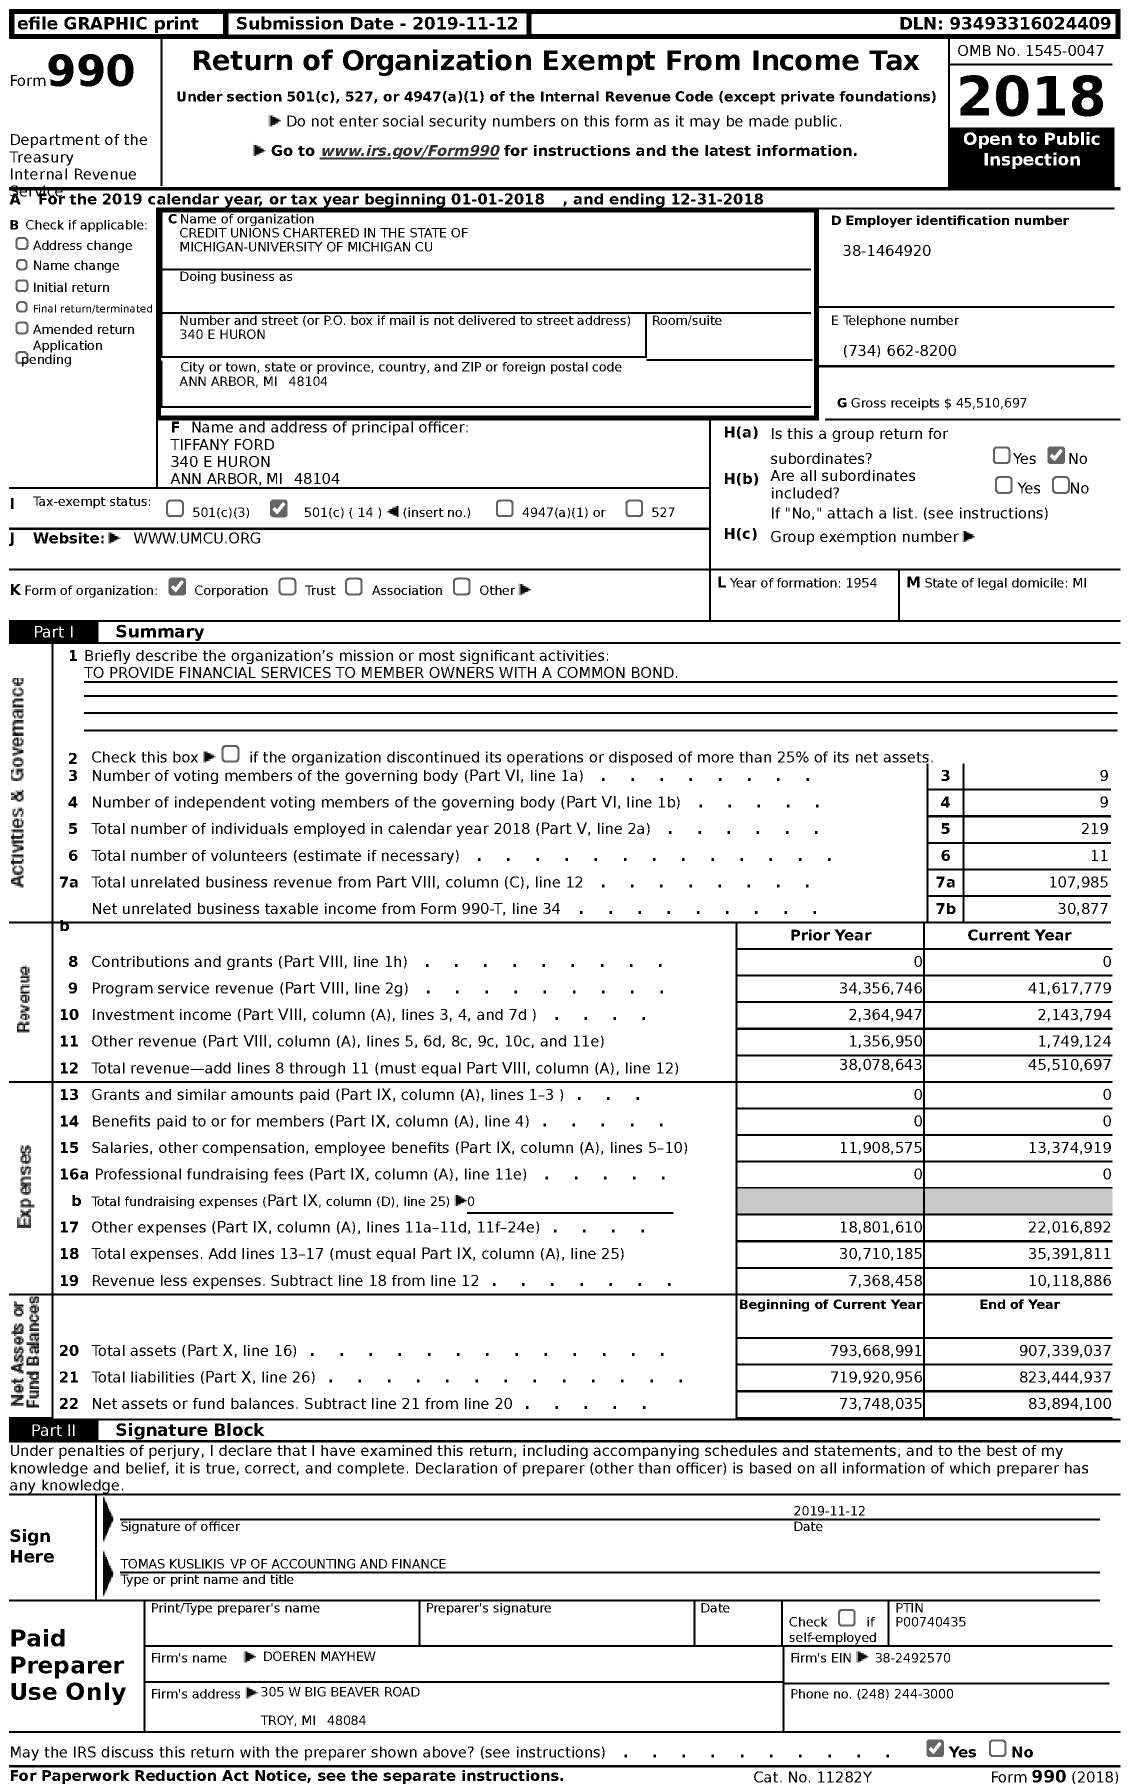 Image of first page of 2018 Form 990 for Credit Unions Chartered in the State of Michigan - 414 University of Michigan Cu (UMCU)